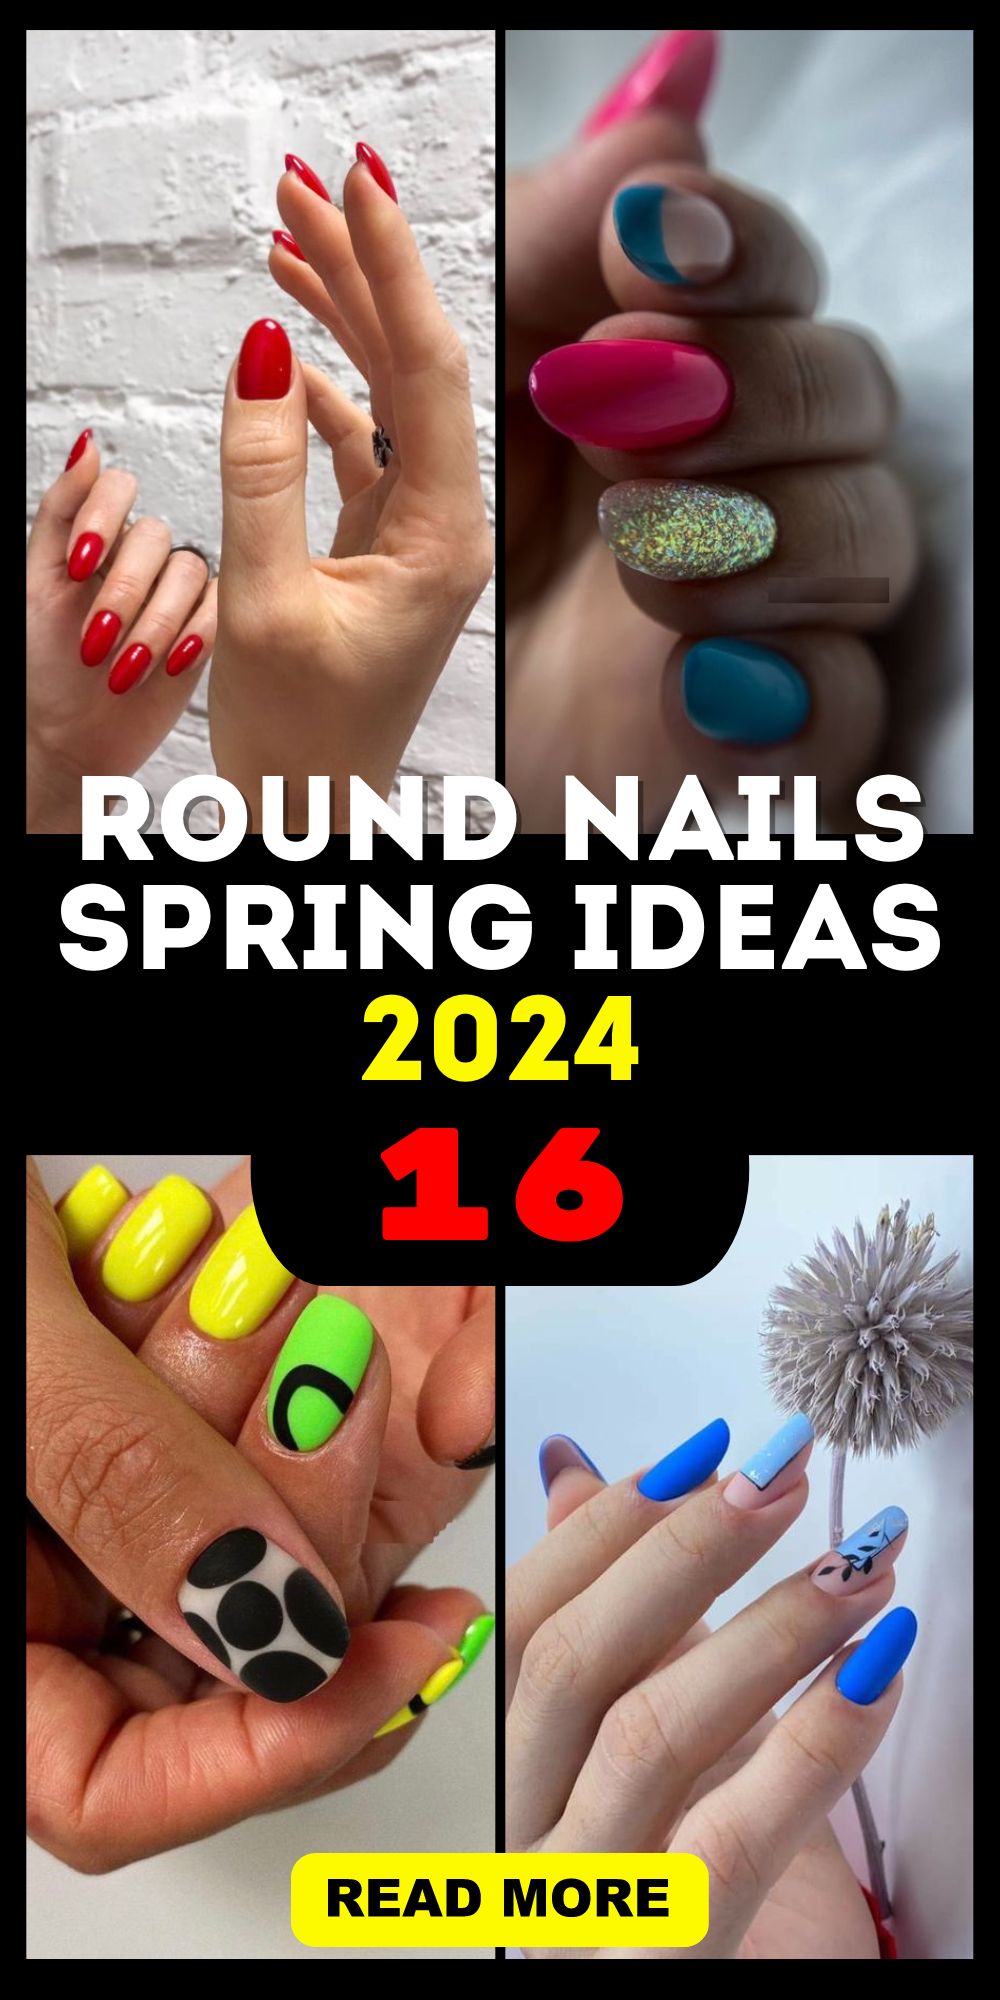 Explore Trendy Round Nails for Spring 2024: Shapes, Colors, and Designs